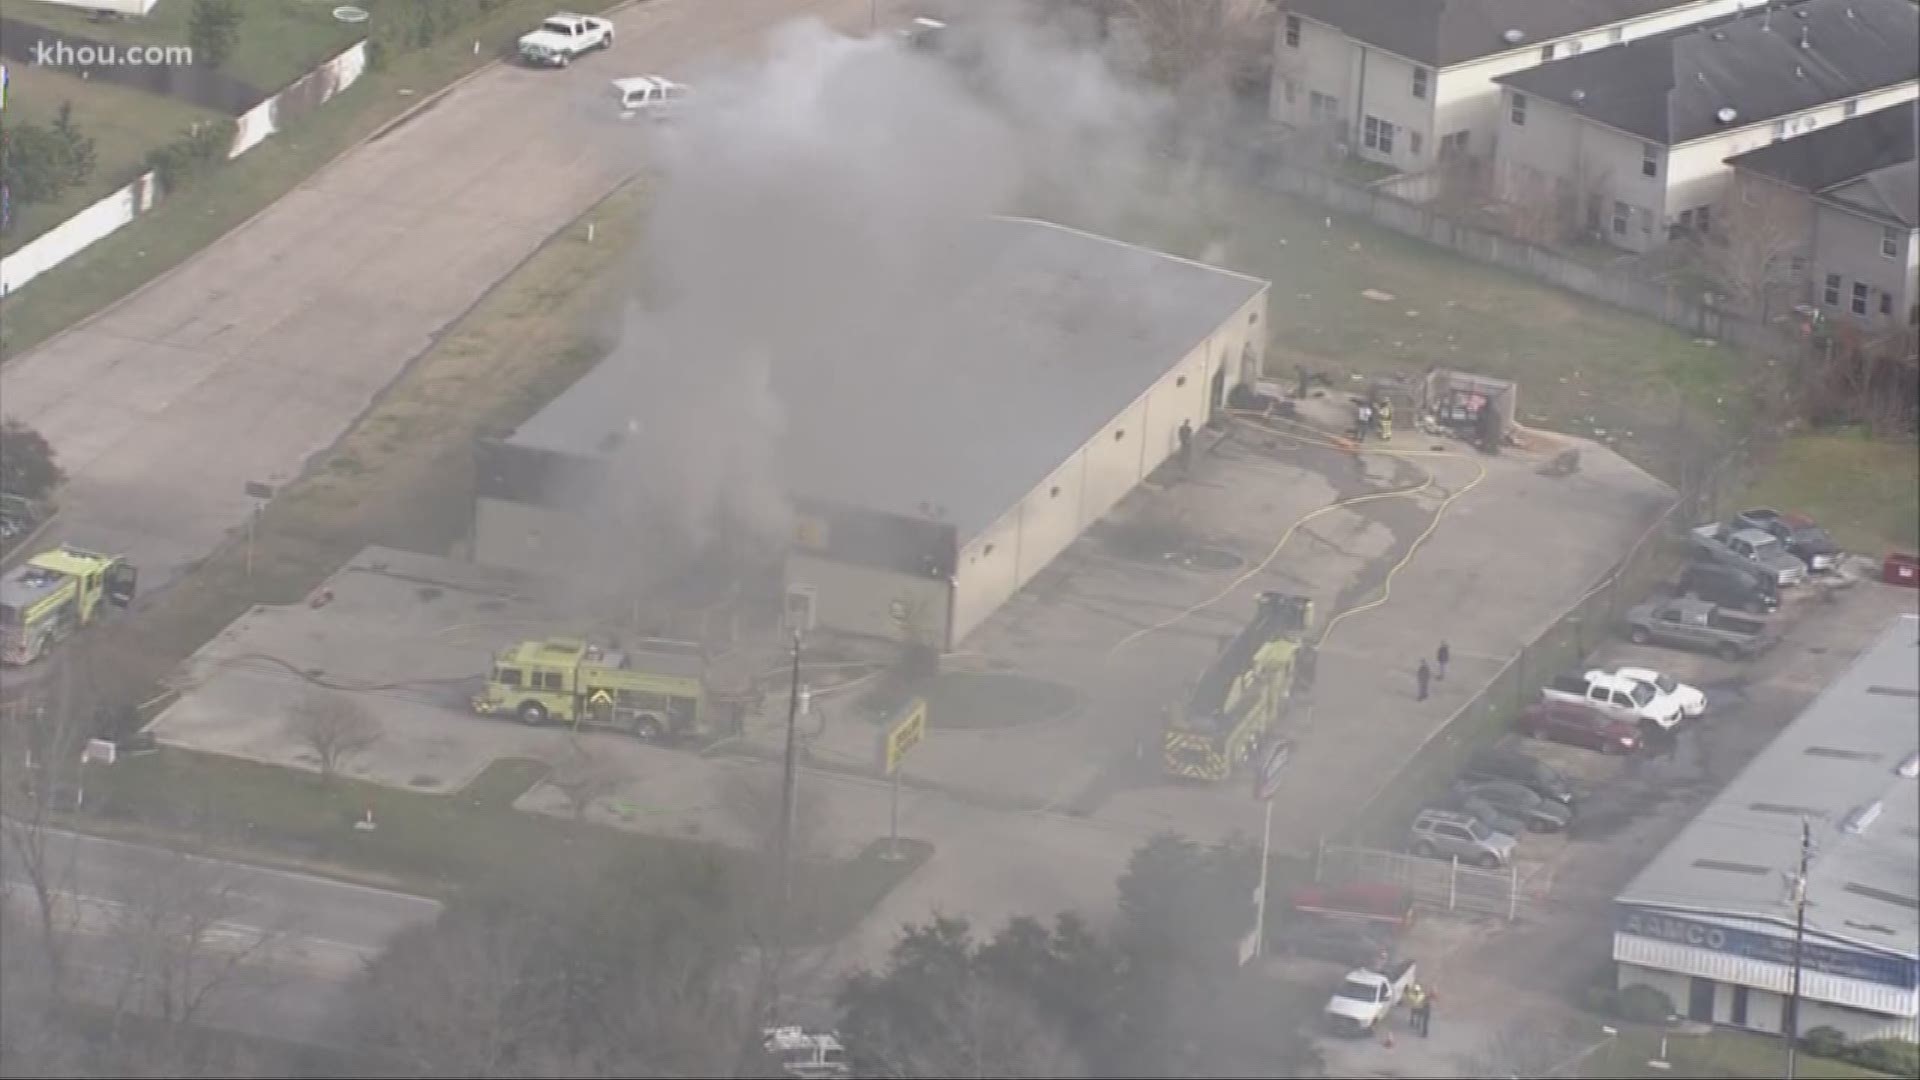 Firefighters are on the scene of a fire at a Dollar General store in northwest Harris County.